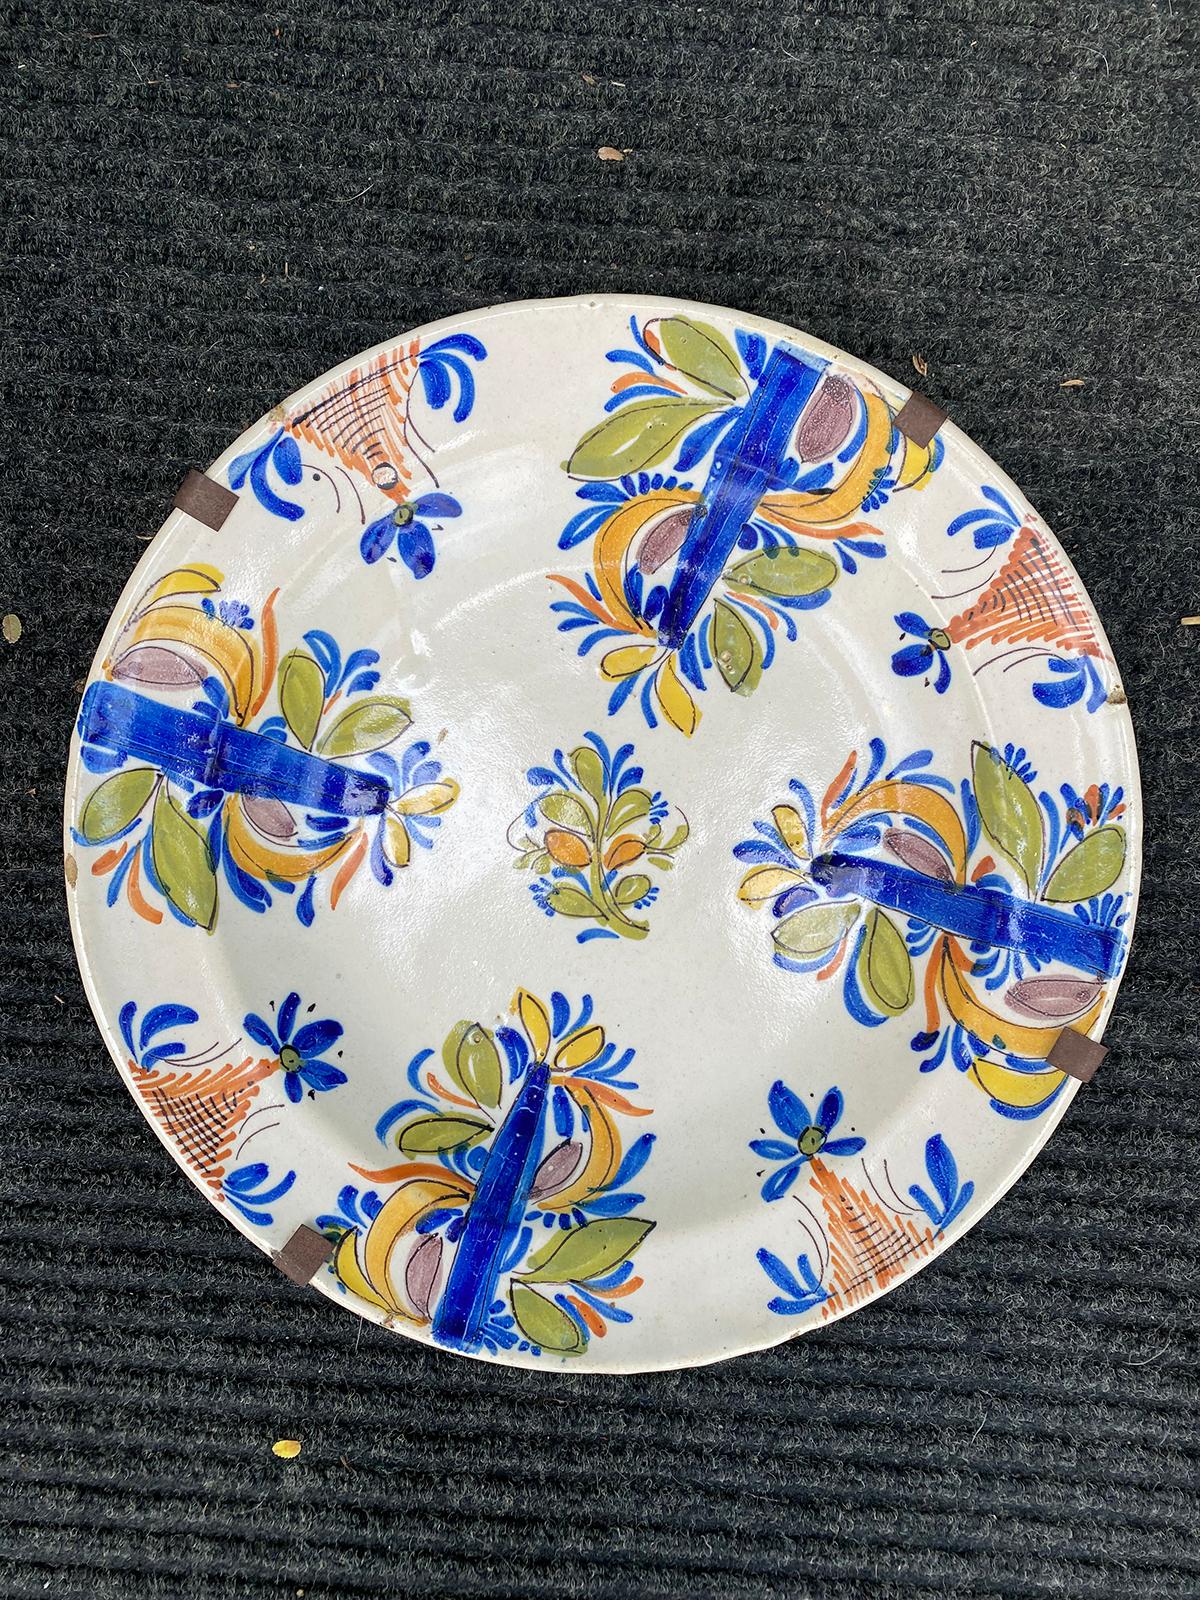 Dutch 18th Century Delft Faience Polychrome Charger with Plate Hanger, Signed V.M.D. For Sale